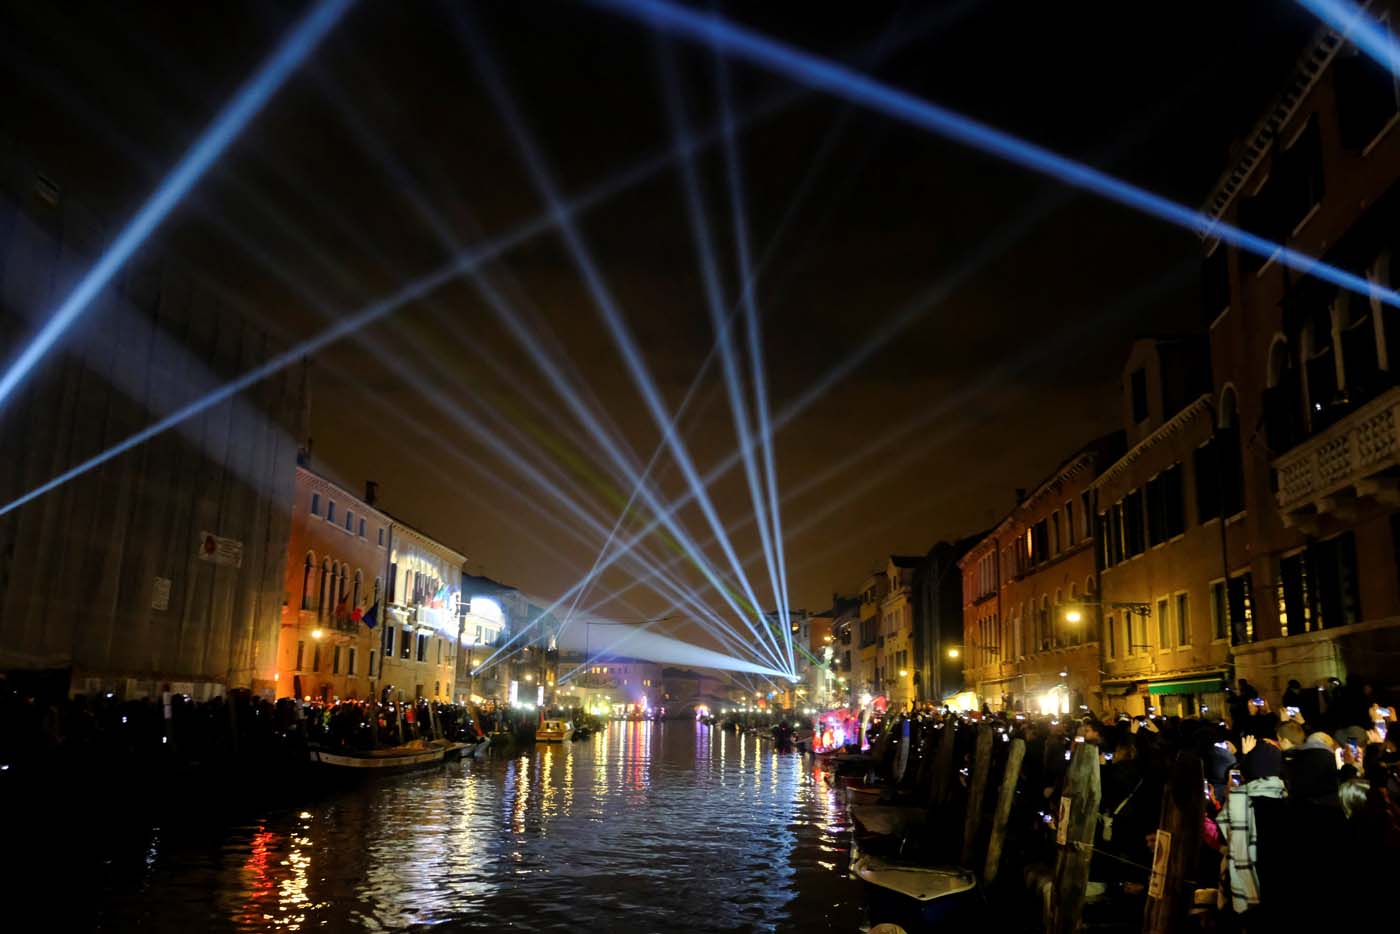 Cannaregio Channel is illuminated during the opening ceremony of the Carnival in Venice, Italy January 27, 2018. REUTERS/Manuel Silvestri